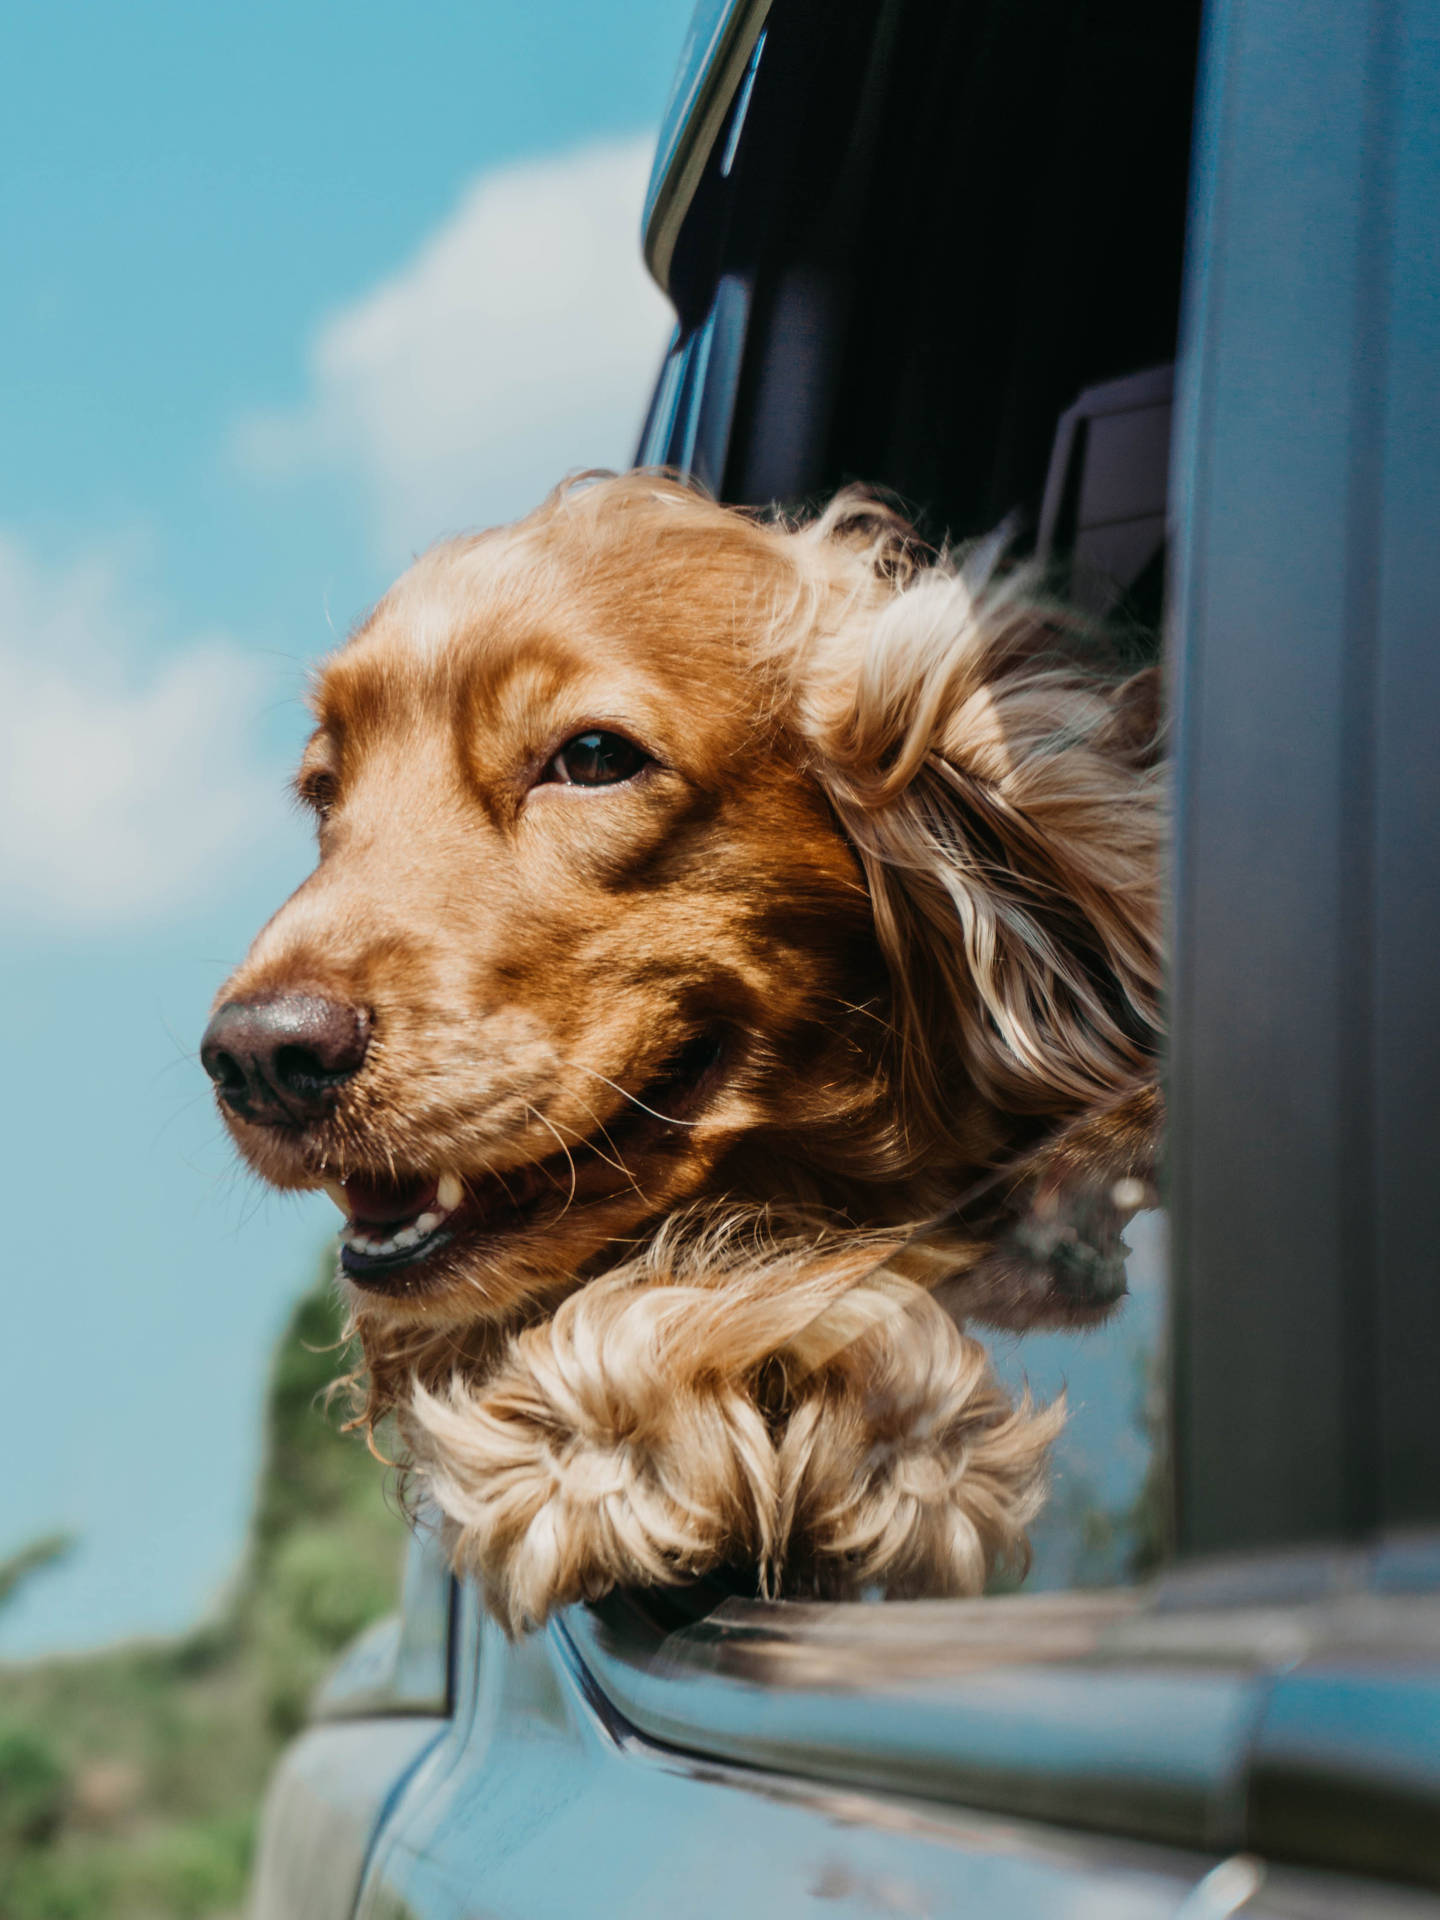 Dog Looking Out Car Window Wallpaper